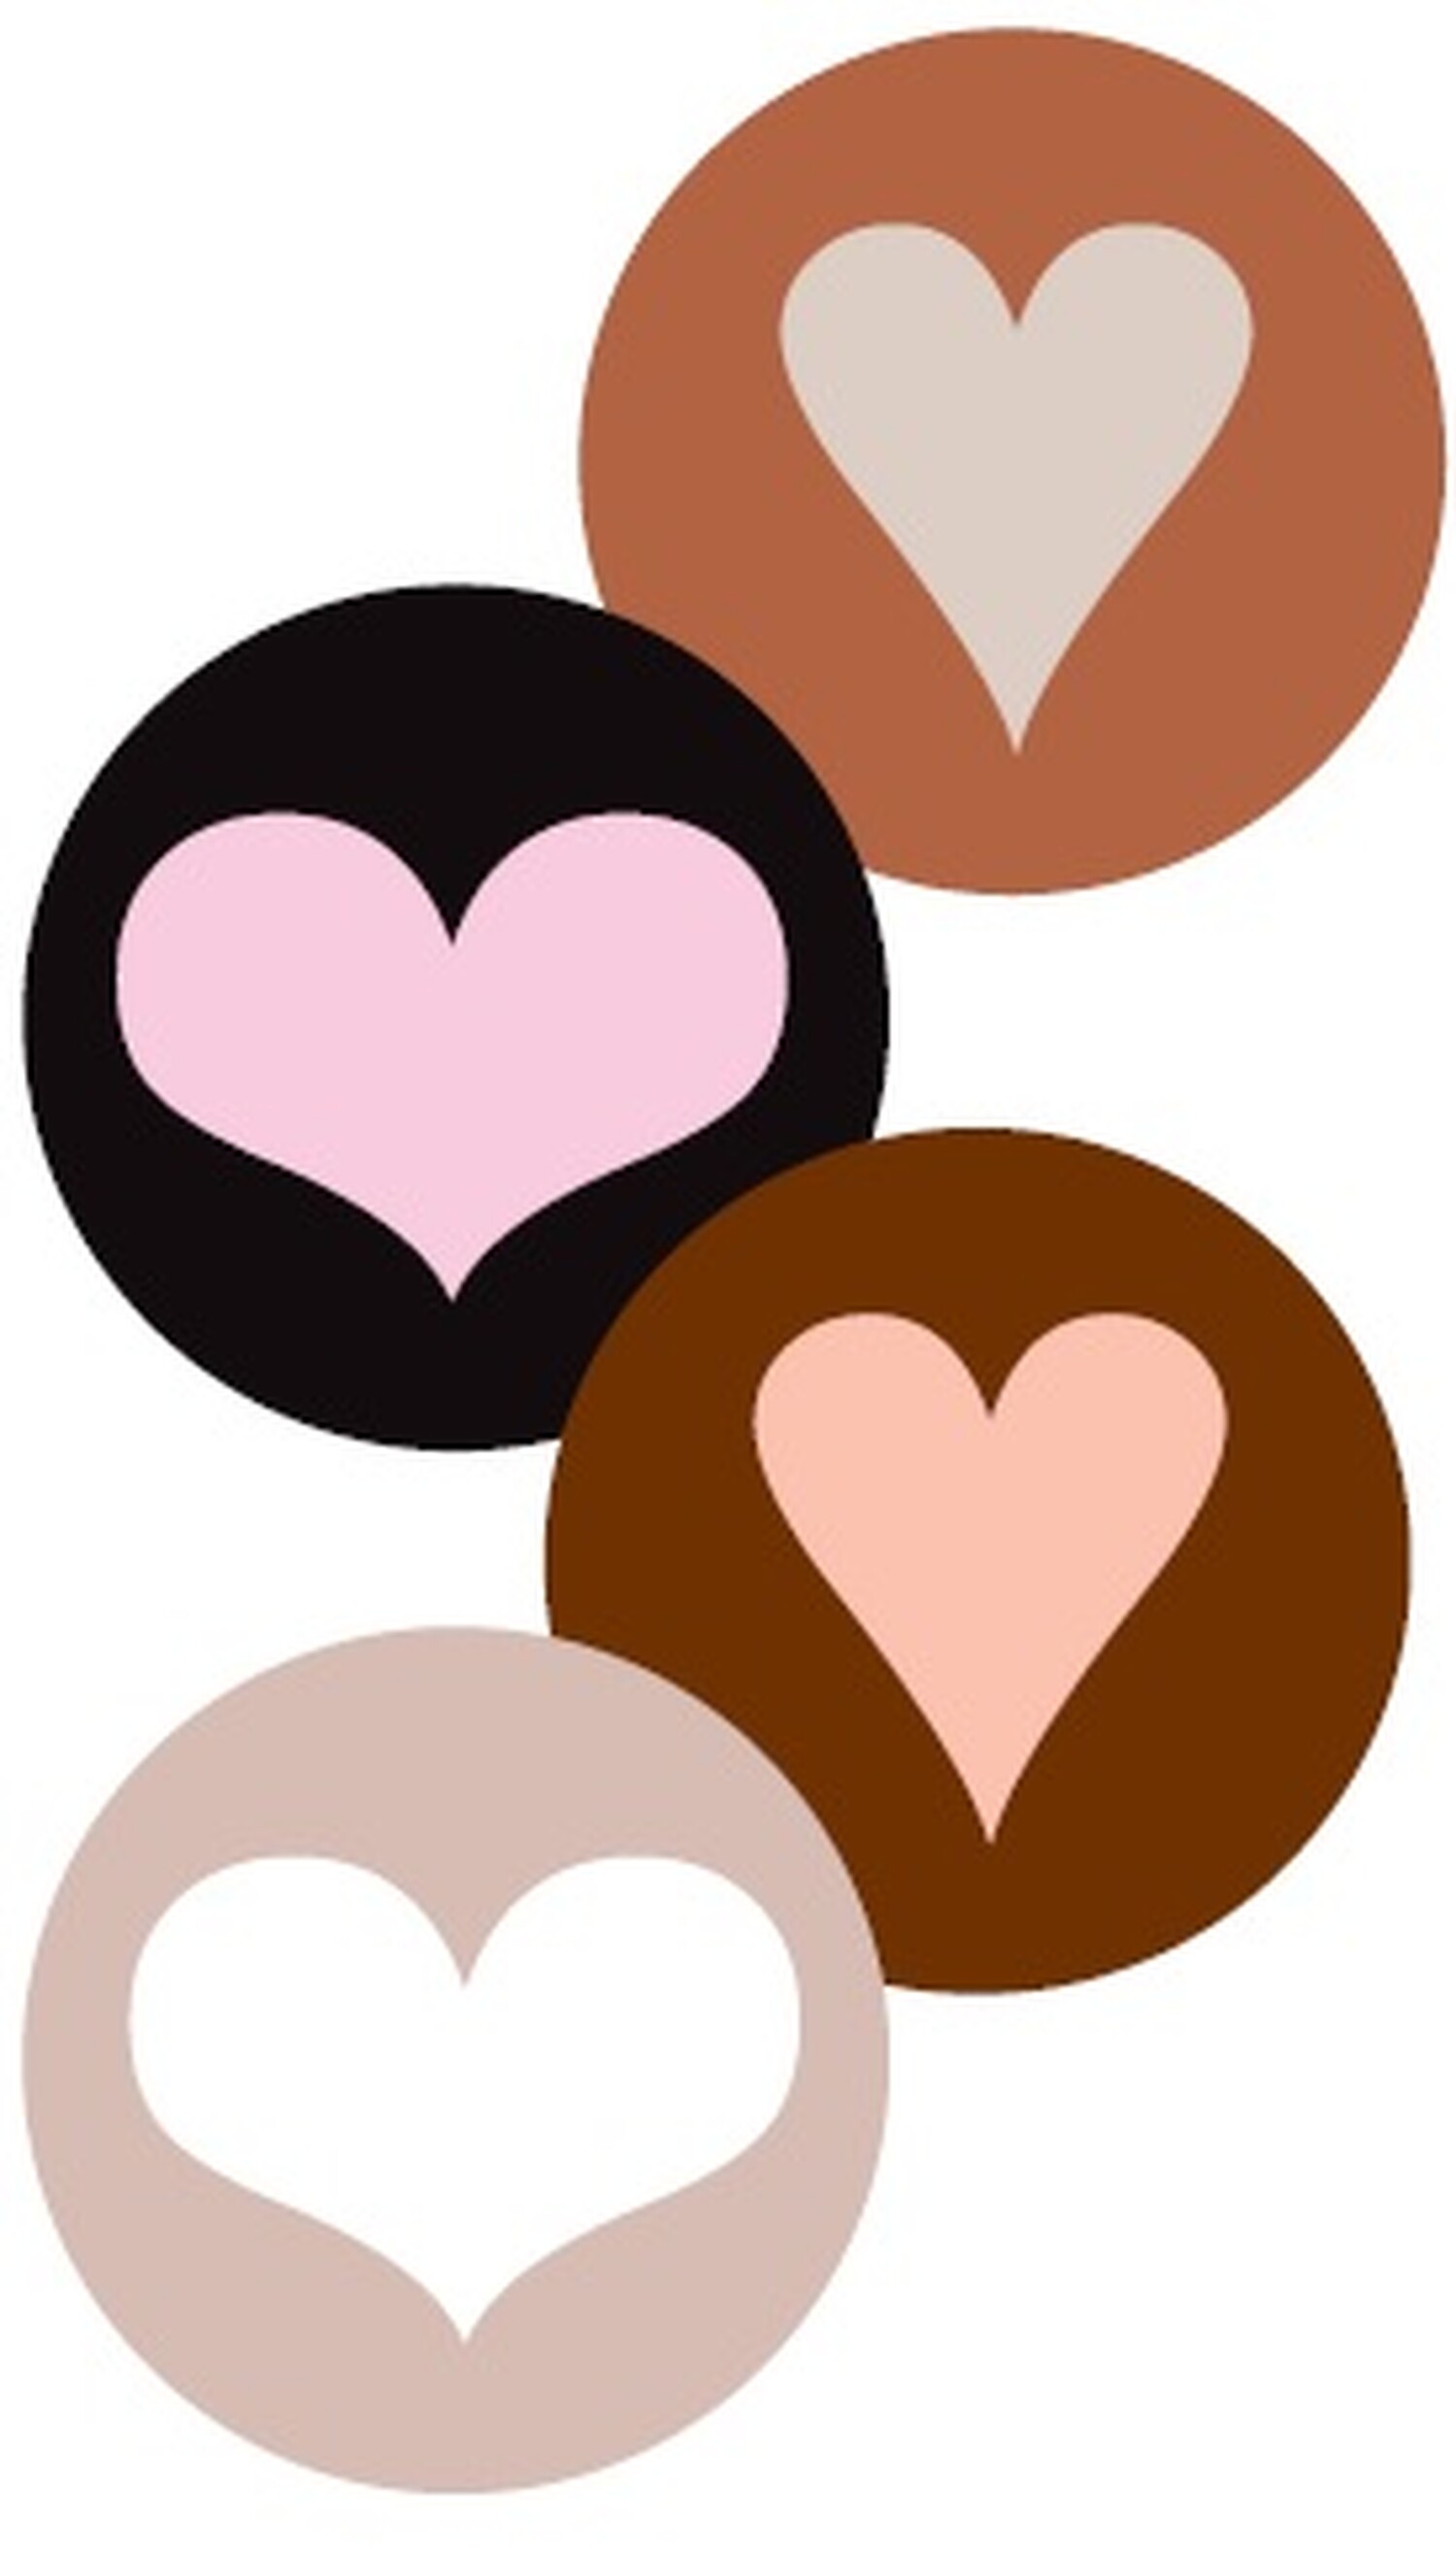 graphic of simple heart shapes in various colors and sizes